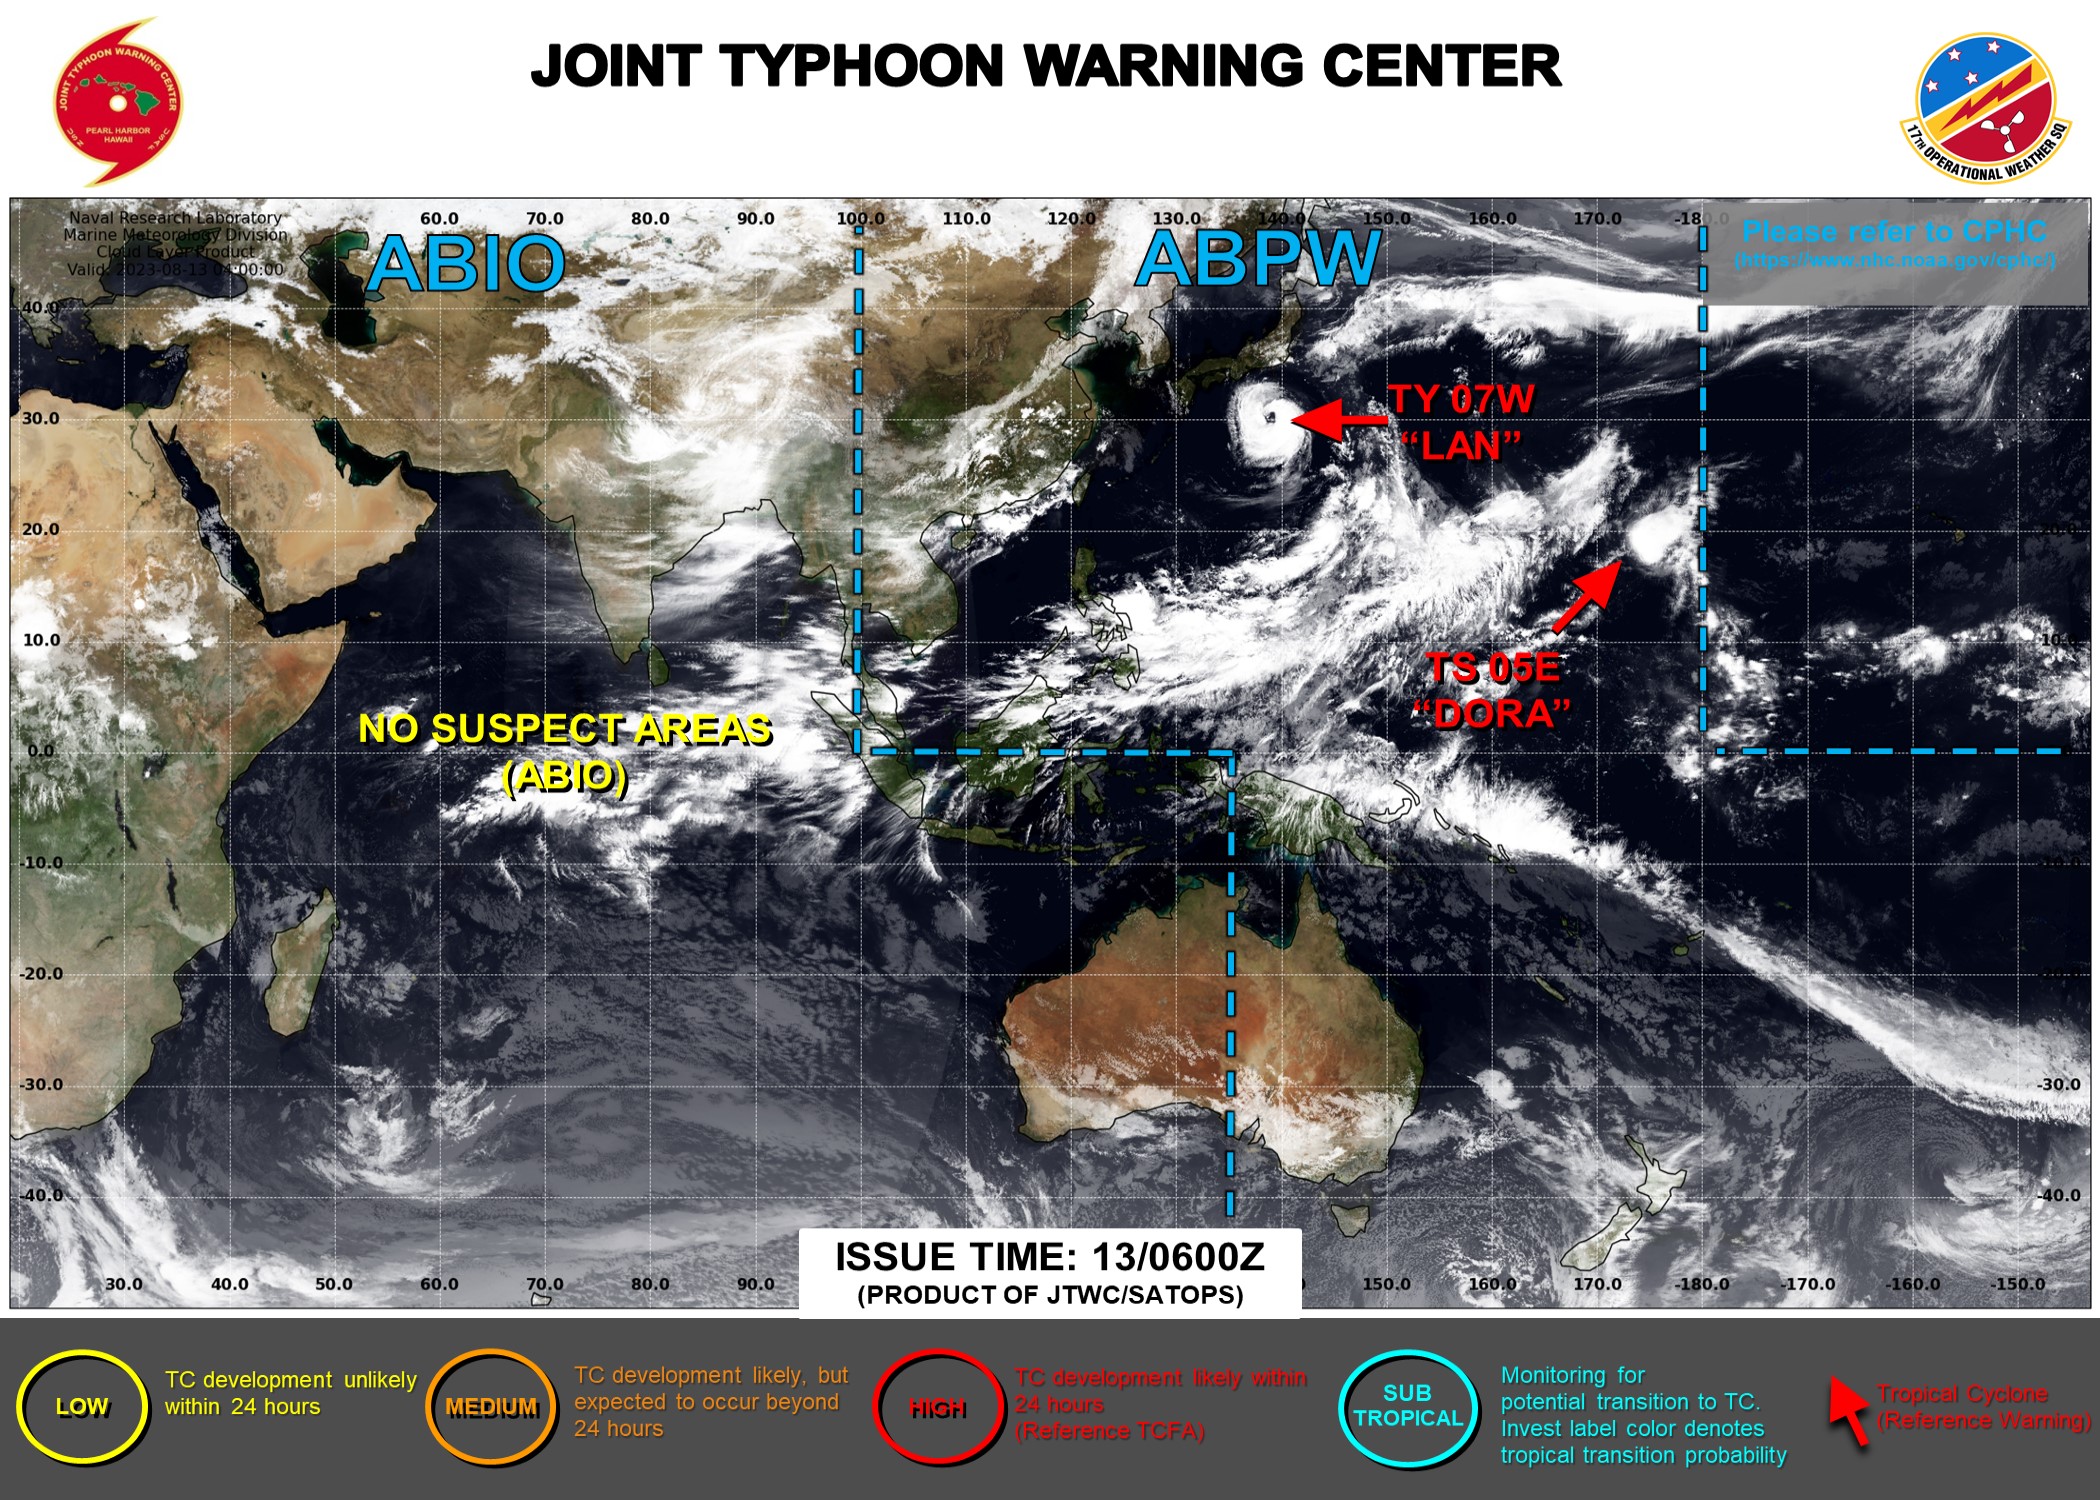 JTWC IS ISSUING 6HOURLY WARNINGS AND 3HOURLY SATELLITE BULLETINS ON 07W(LAN) AND ON 05E(DORA).